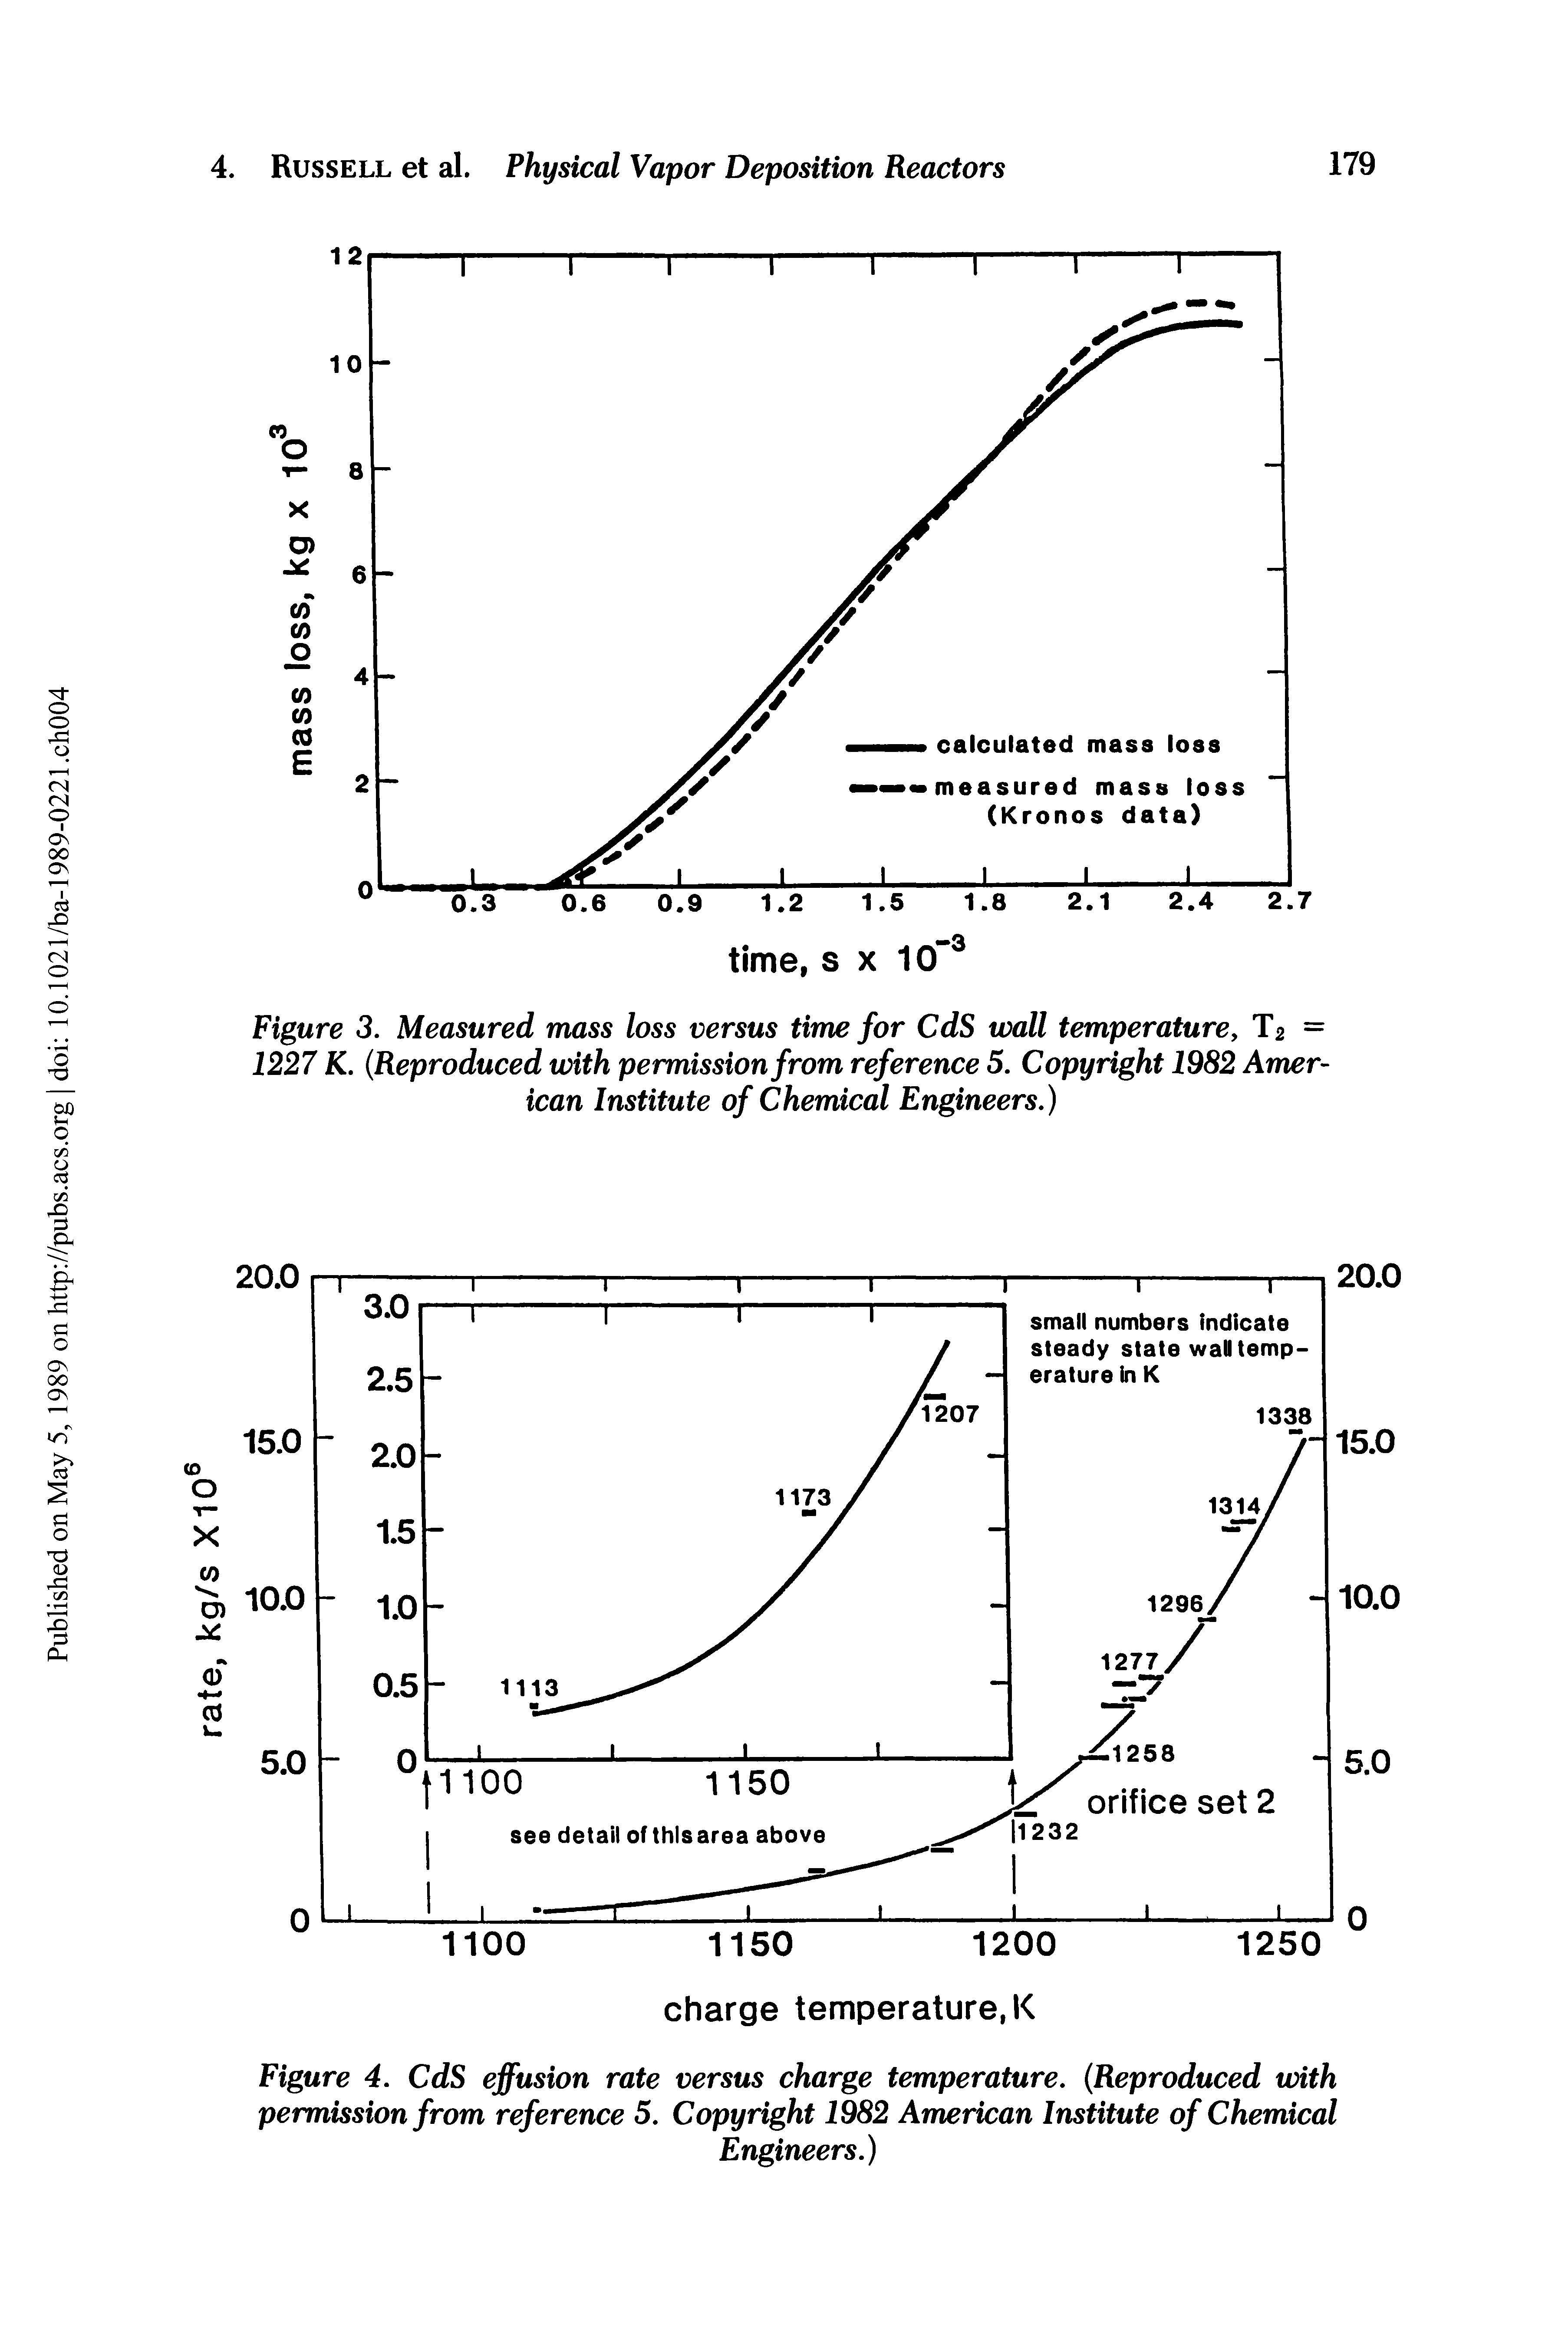 Figure 4. CdS effusion rate versus charge temperature. (Reproduced with permission from reference 5. Copyright 1982 American Institute of Chemical...